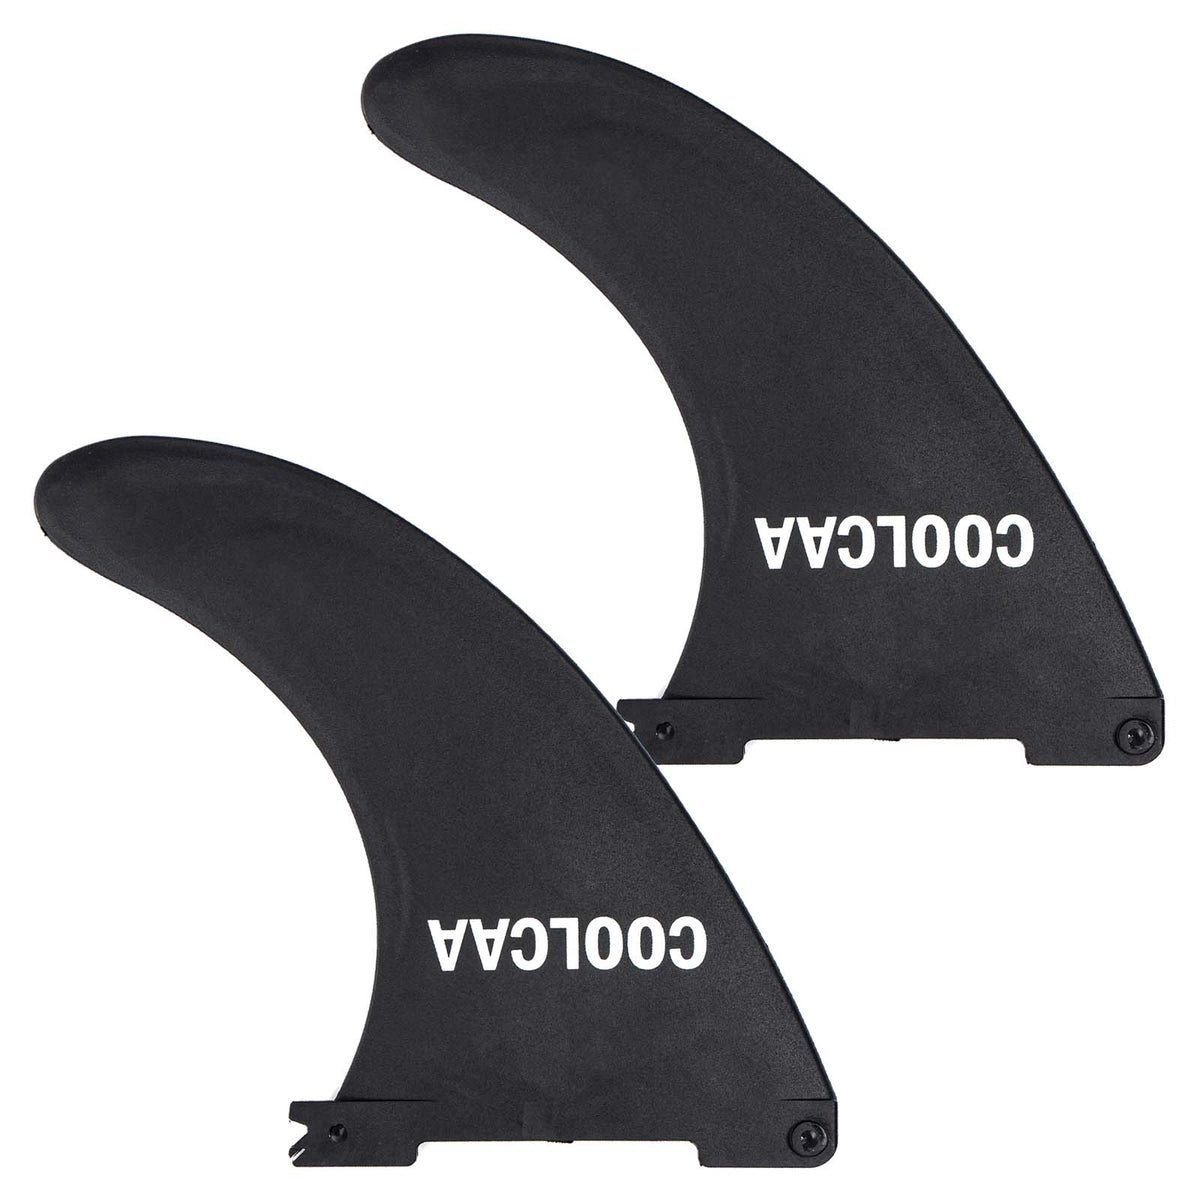 Enhanced SUP Control with COOLCAA Fin